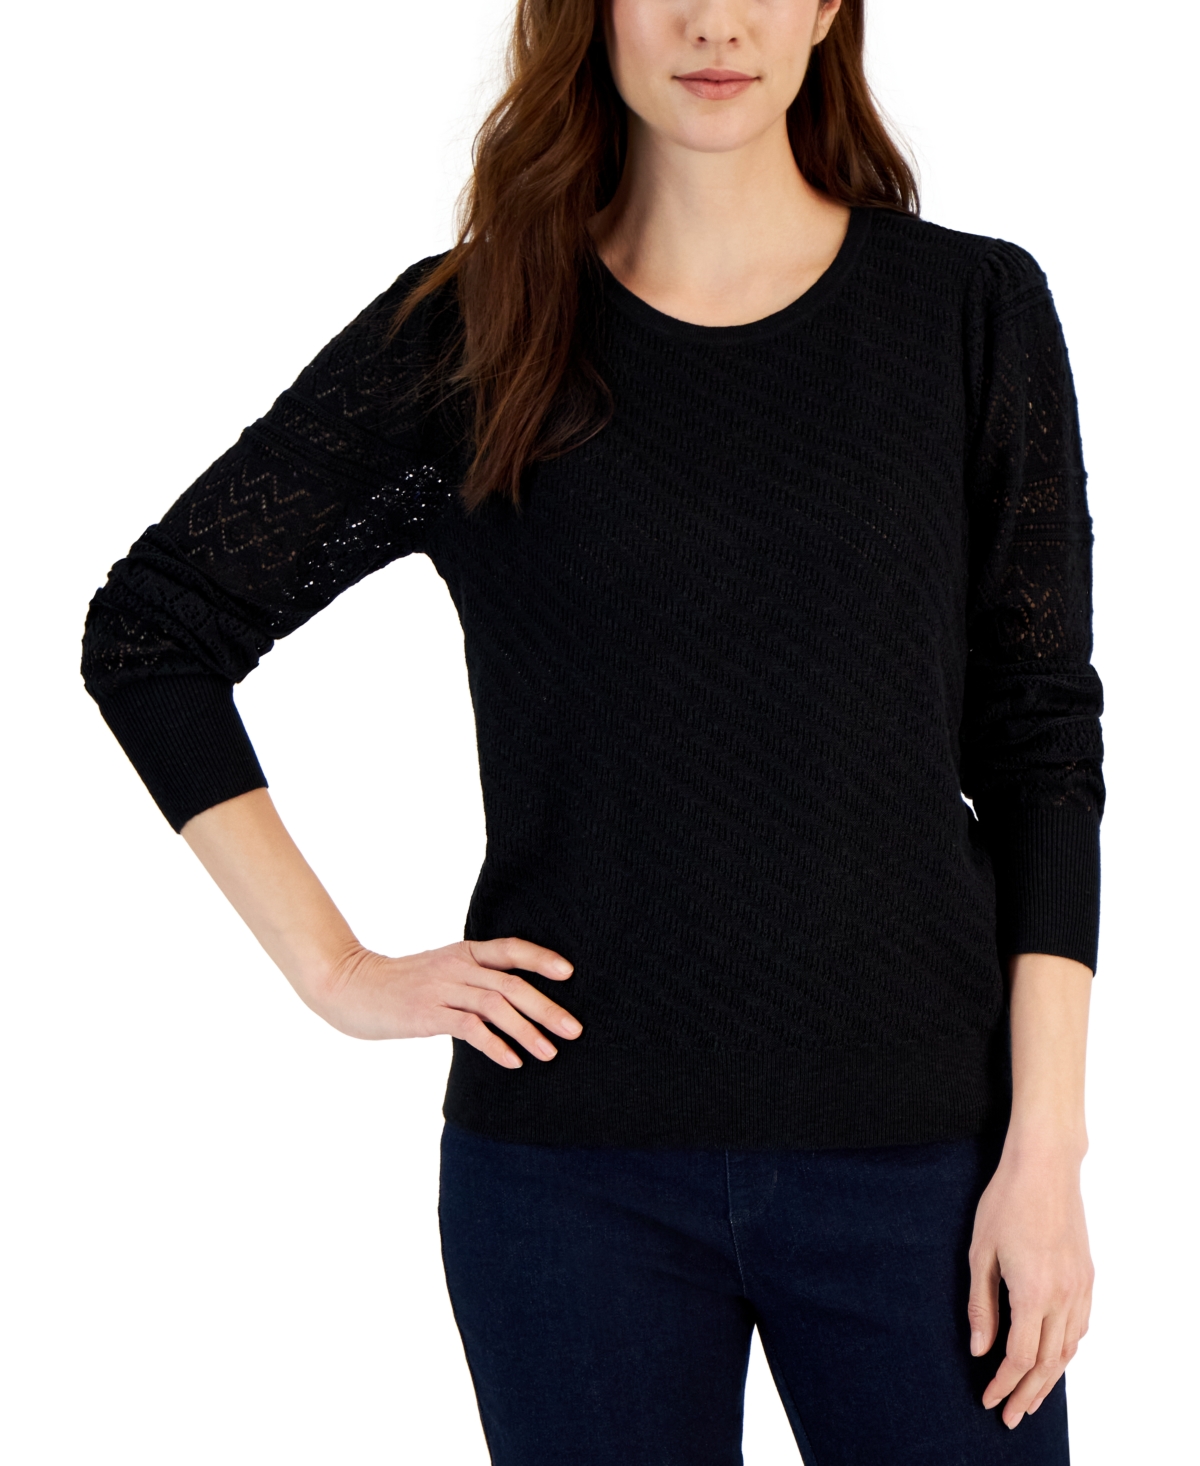 STYLE & CO PETITE POINTELLE PATTERN SLEEVE SWEATER, CREATED FOR MACY'S